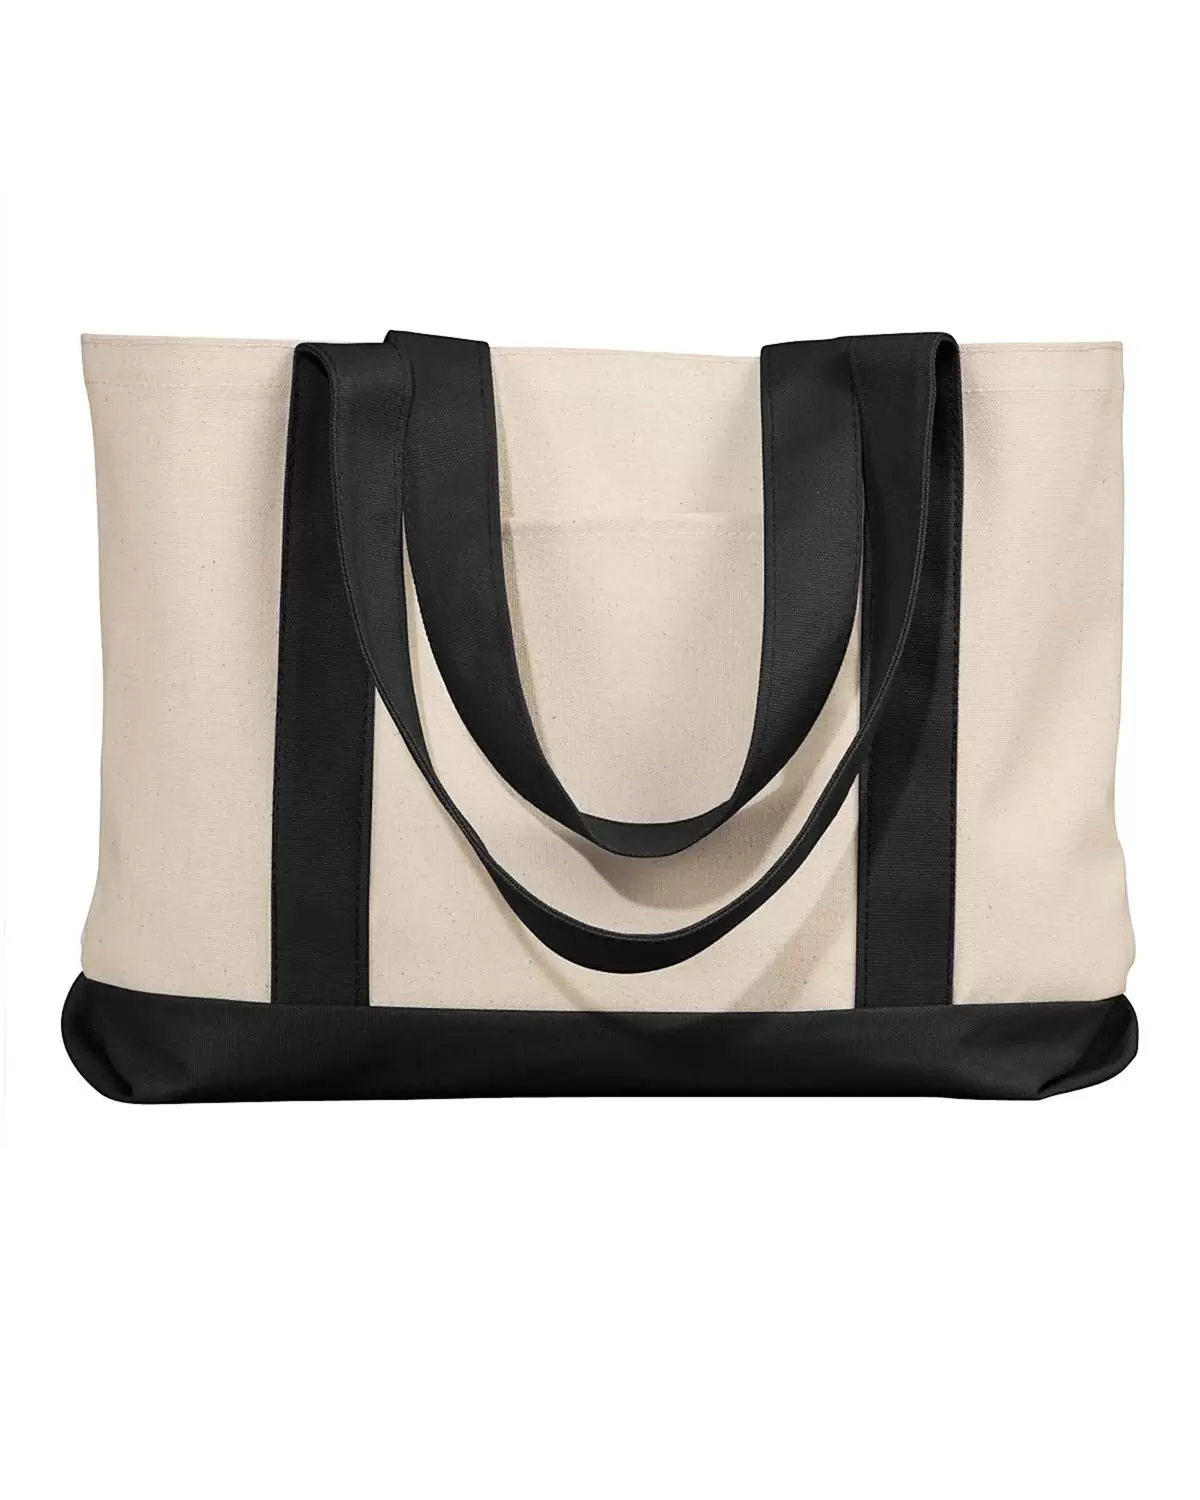 Cotton Canvas Tote Bags with Contrast Handles